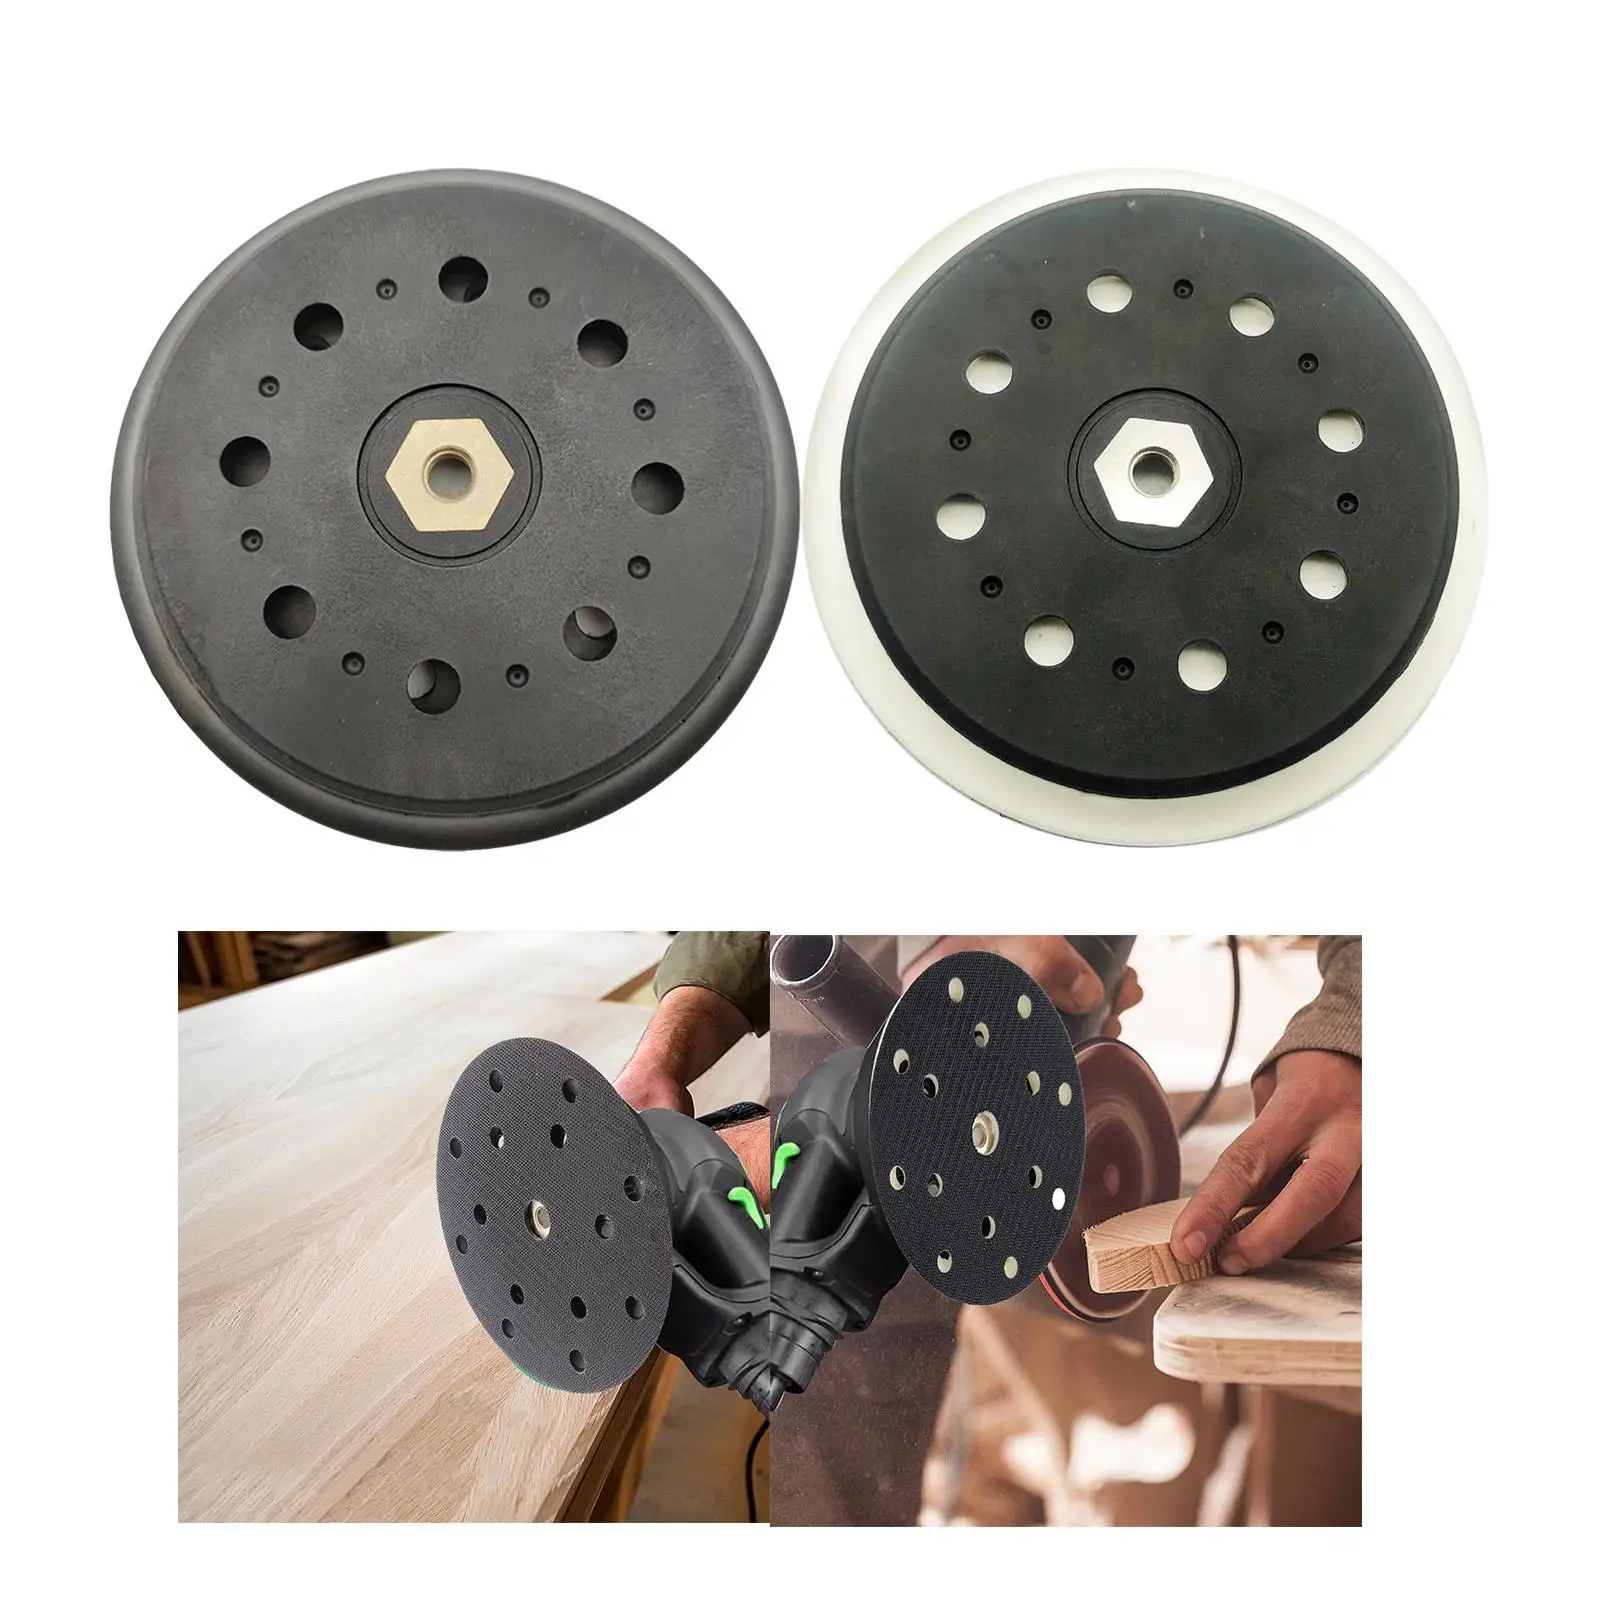 15 Hole Sander Sanding Disc 6 Inches Backing Grinding Polishing Pad Disc Durable Sander Polisher Tool for Polisher Woodworking